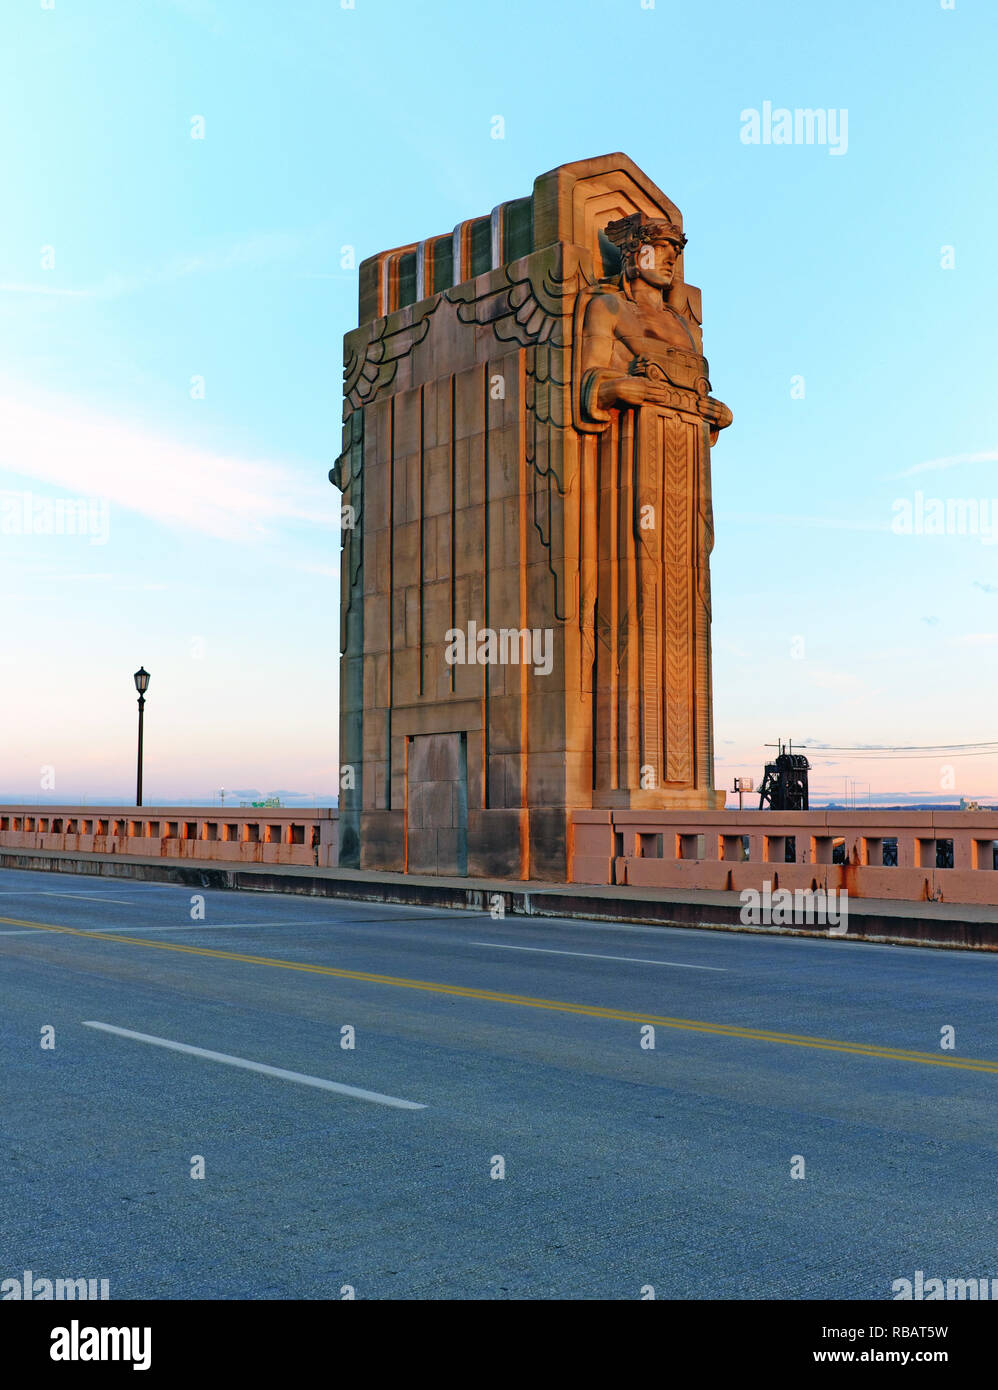 The Hope Memorial Bridge, also known as the Lorain-Carnegie Bridge, in Cleveland, Ohio, USA is known for its decorative Art-Deco pylons. Stock Photo